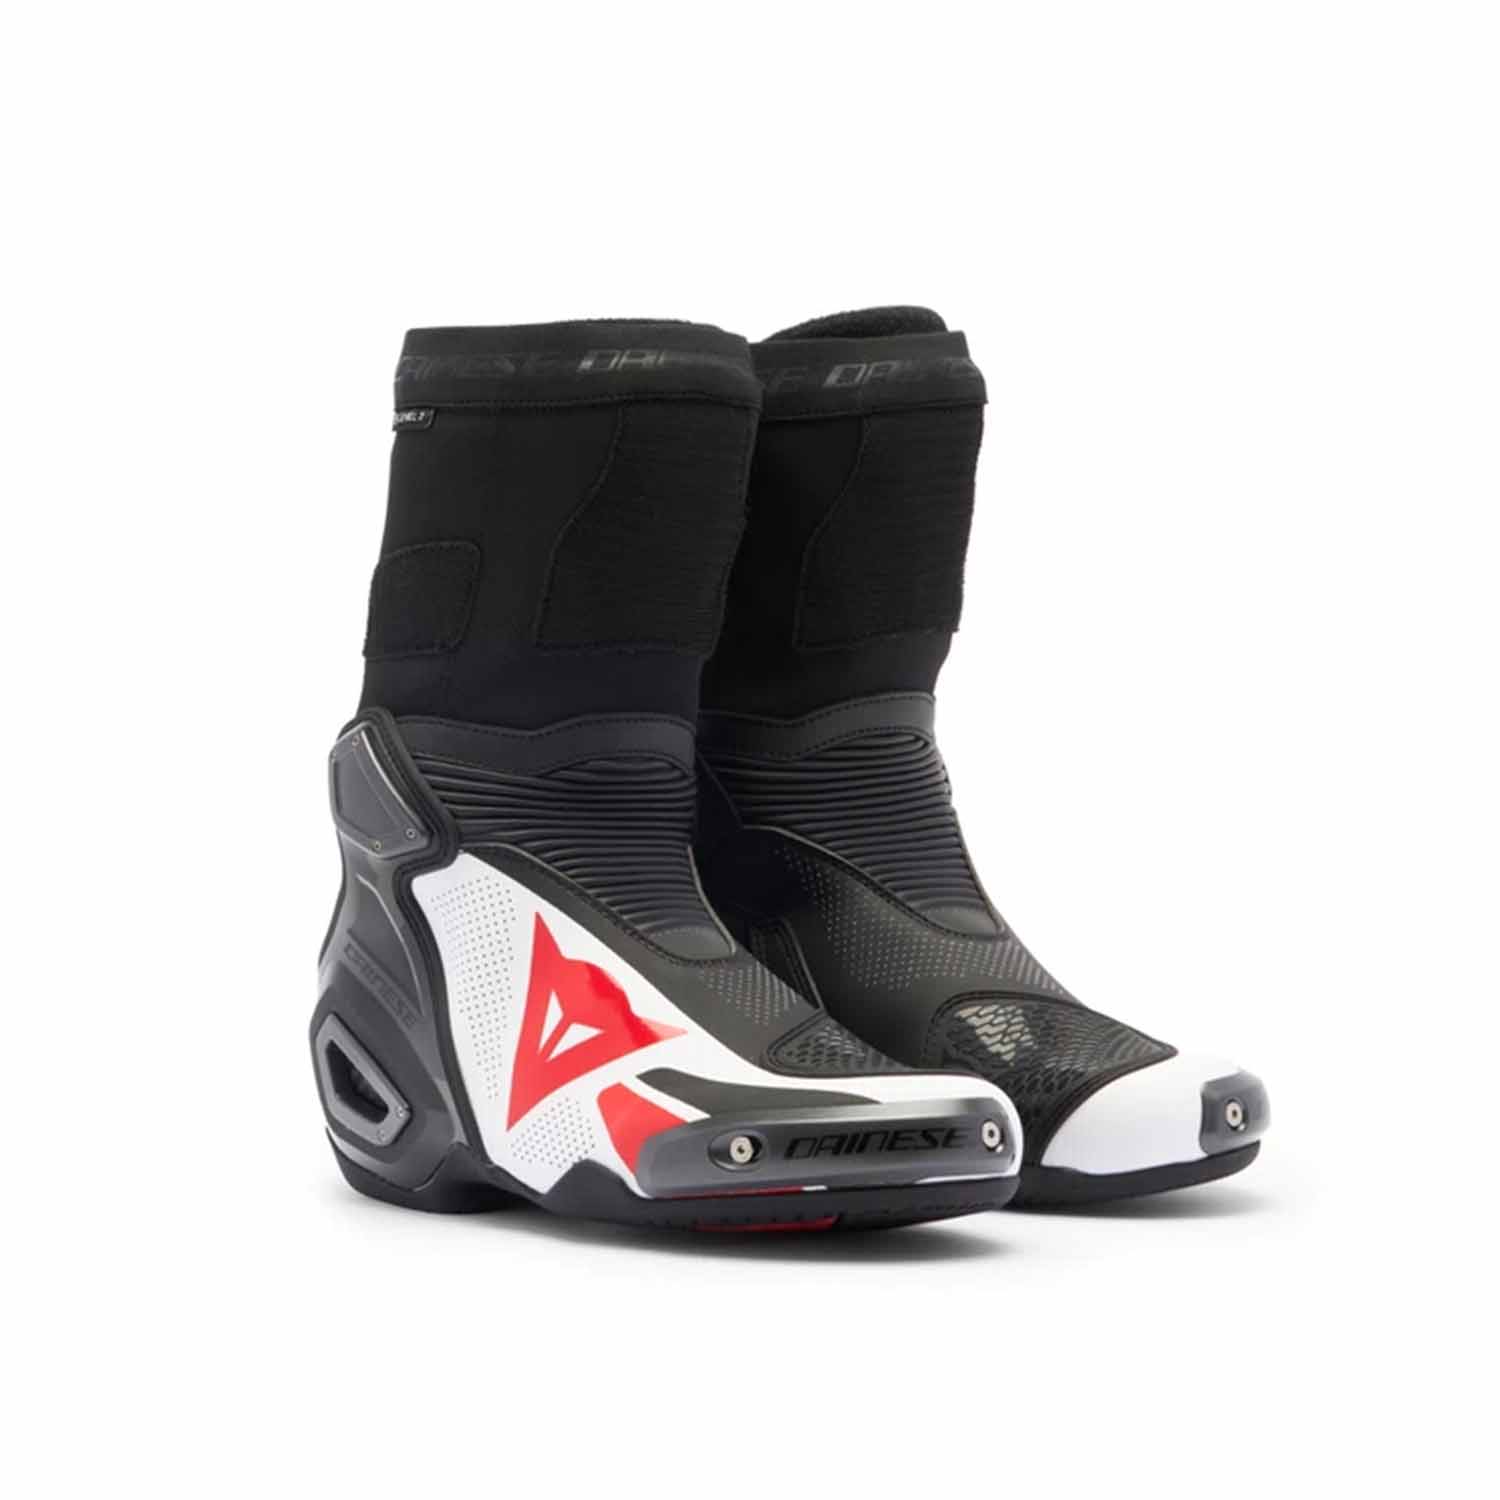 Image of Dainese Axial 2 Air Boots Black White Lava Red Size 40 ID 8051019739810